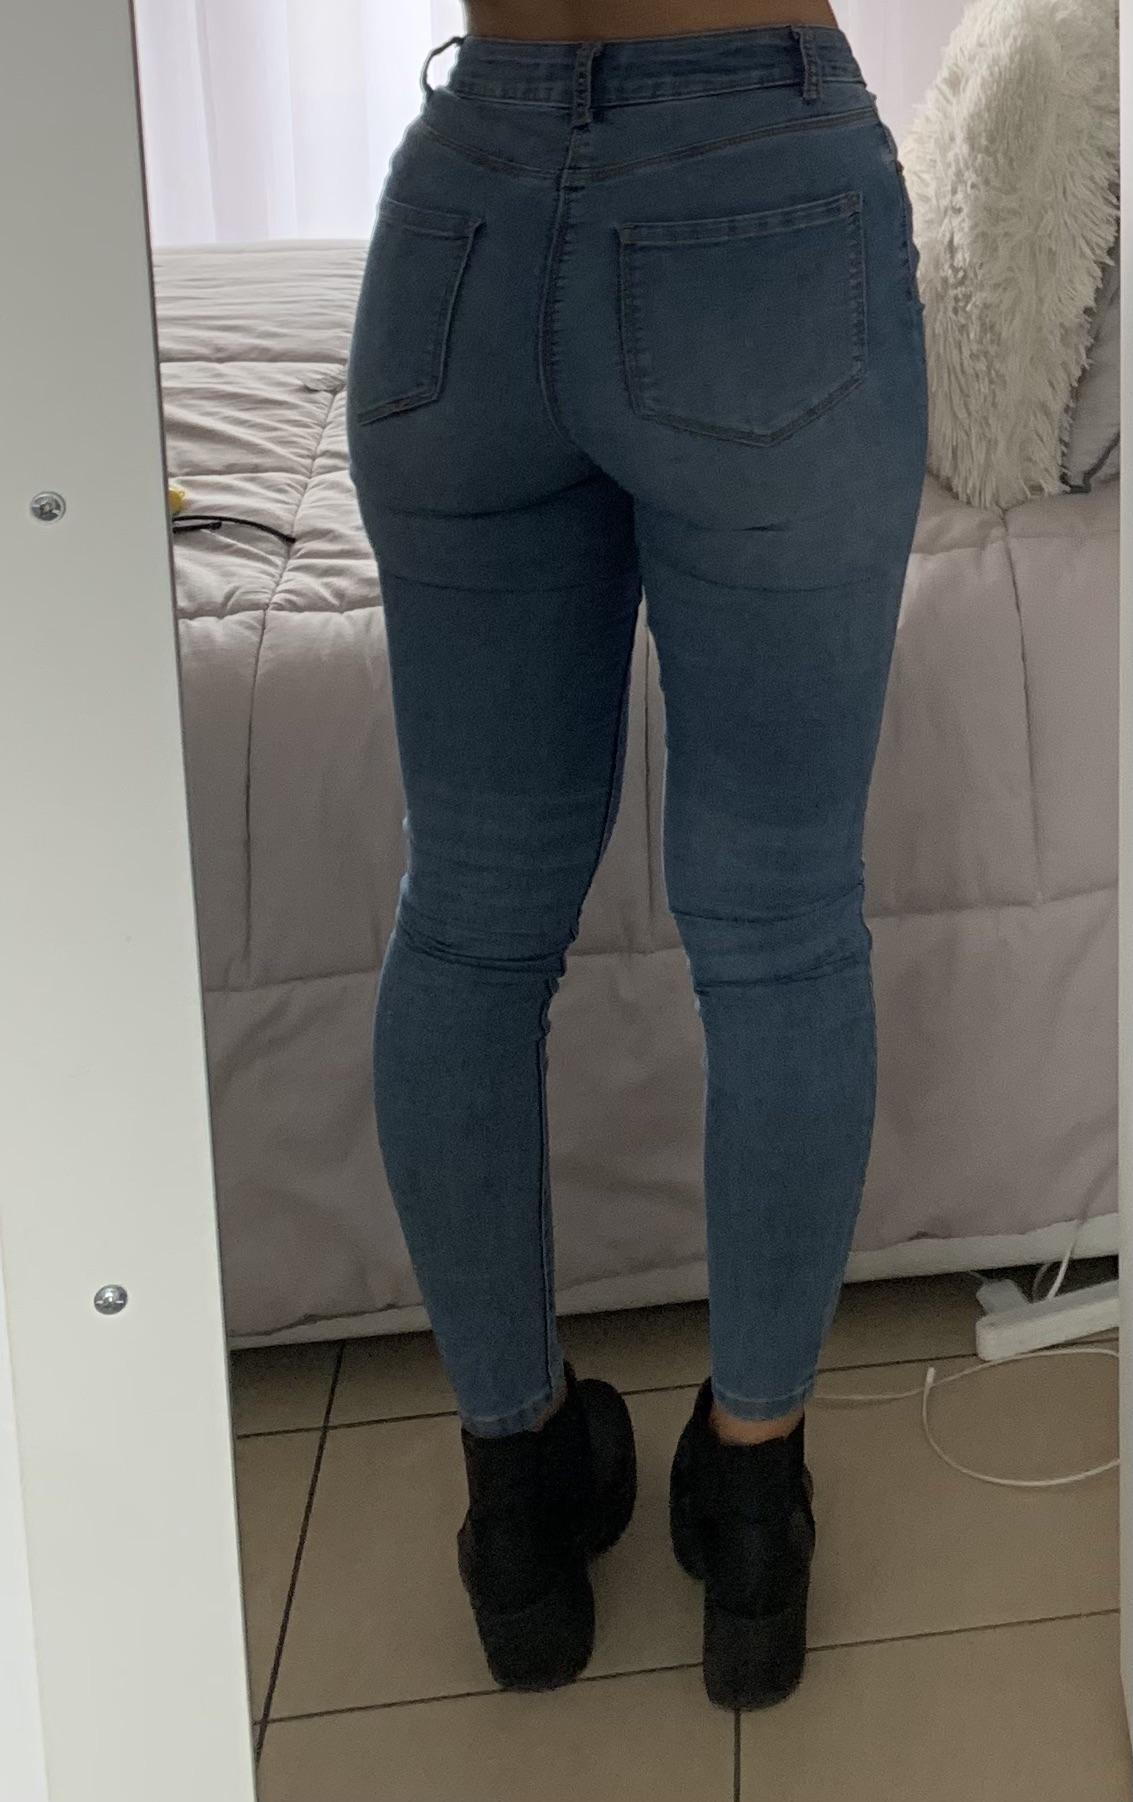 fave pair of jeans 🥰 | Scrolller